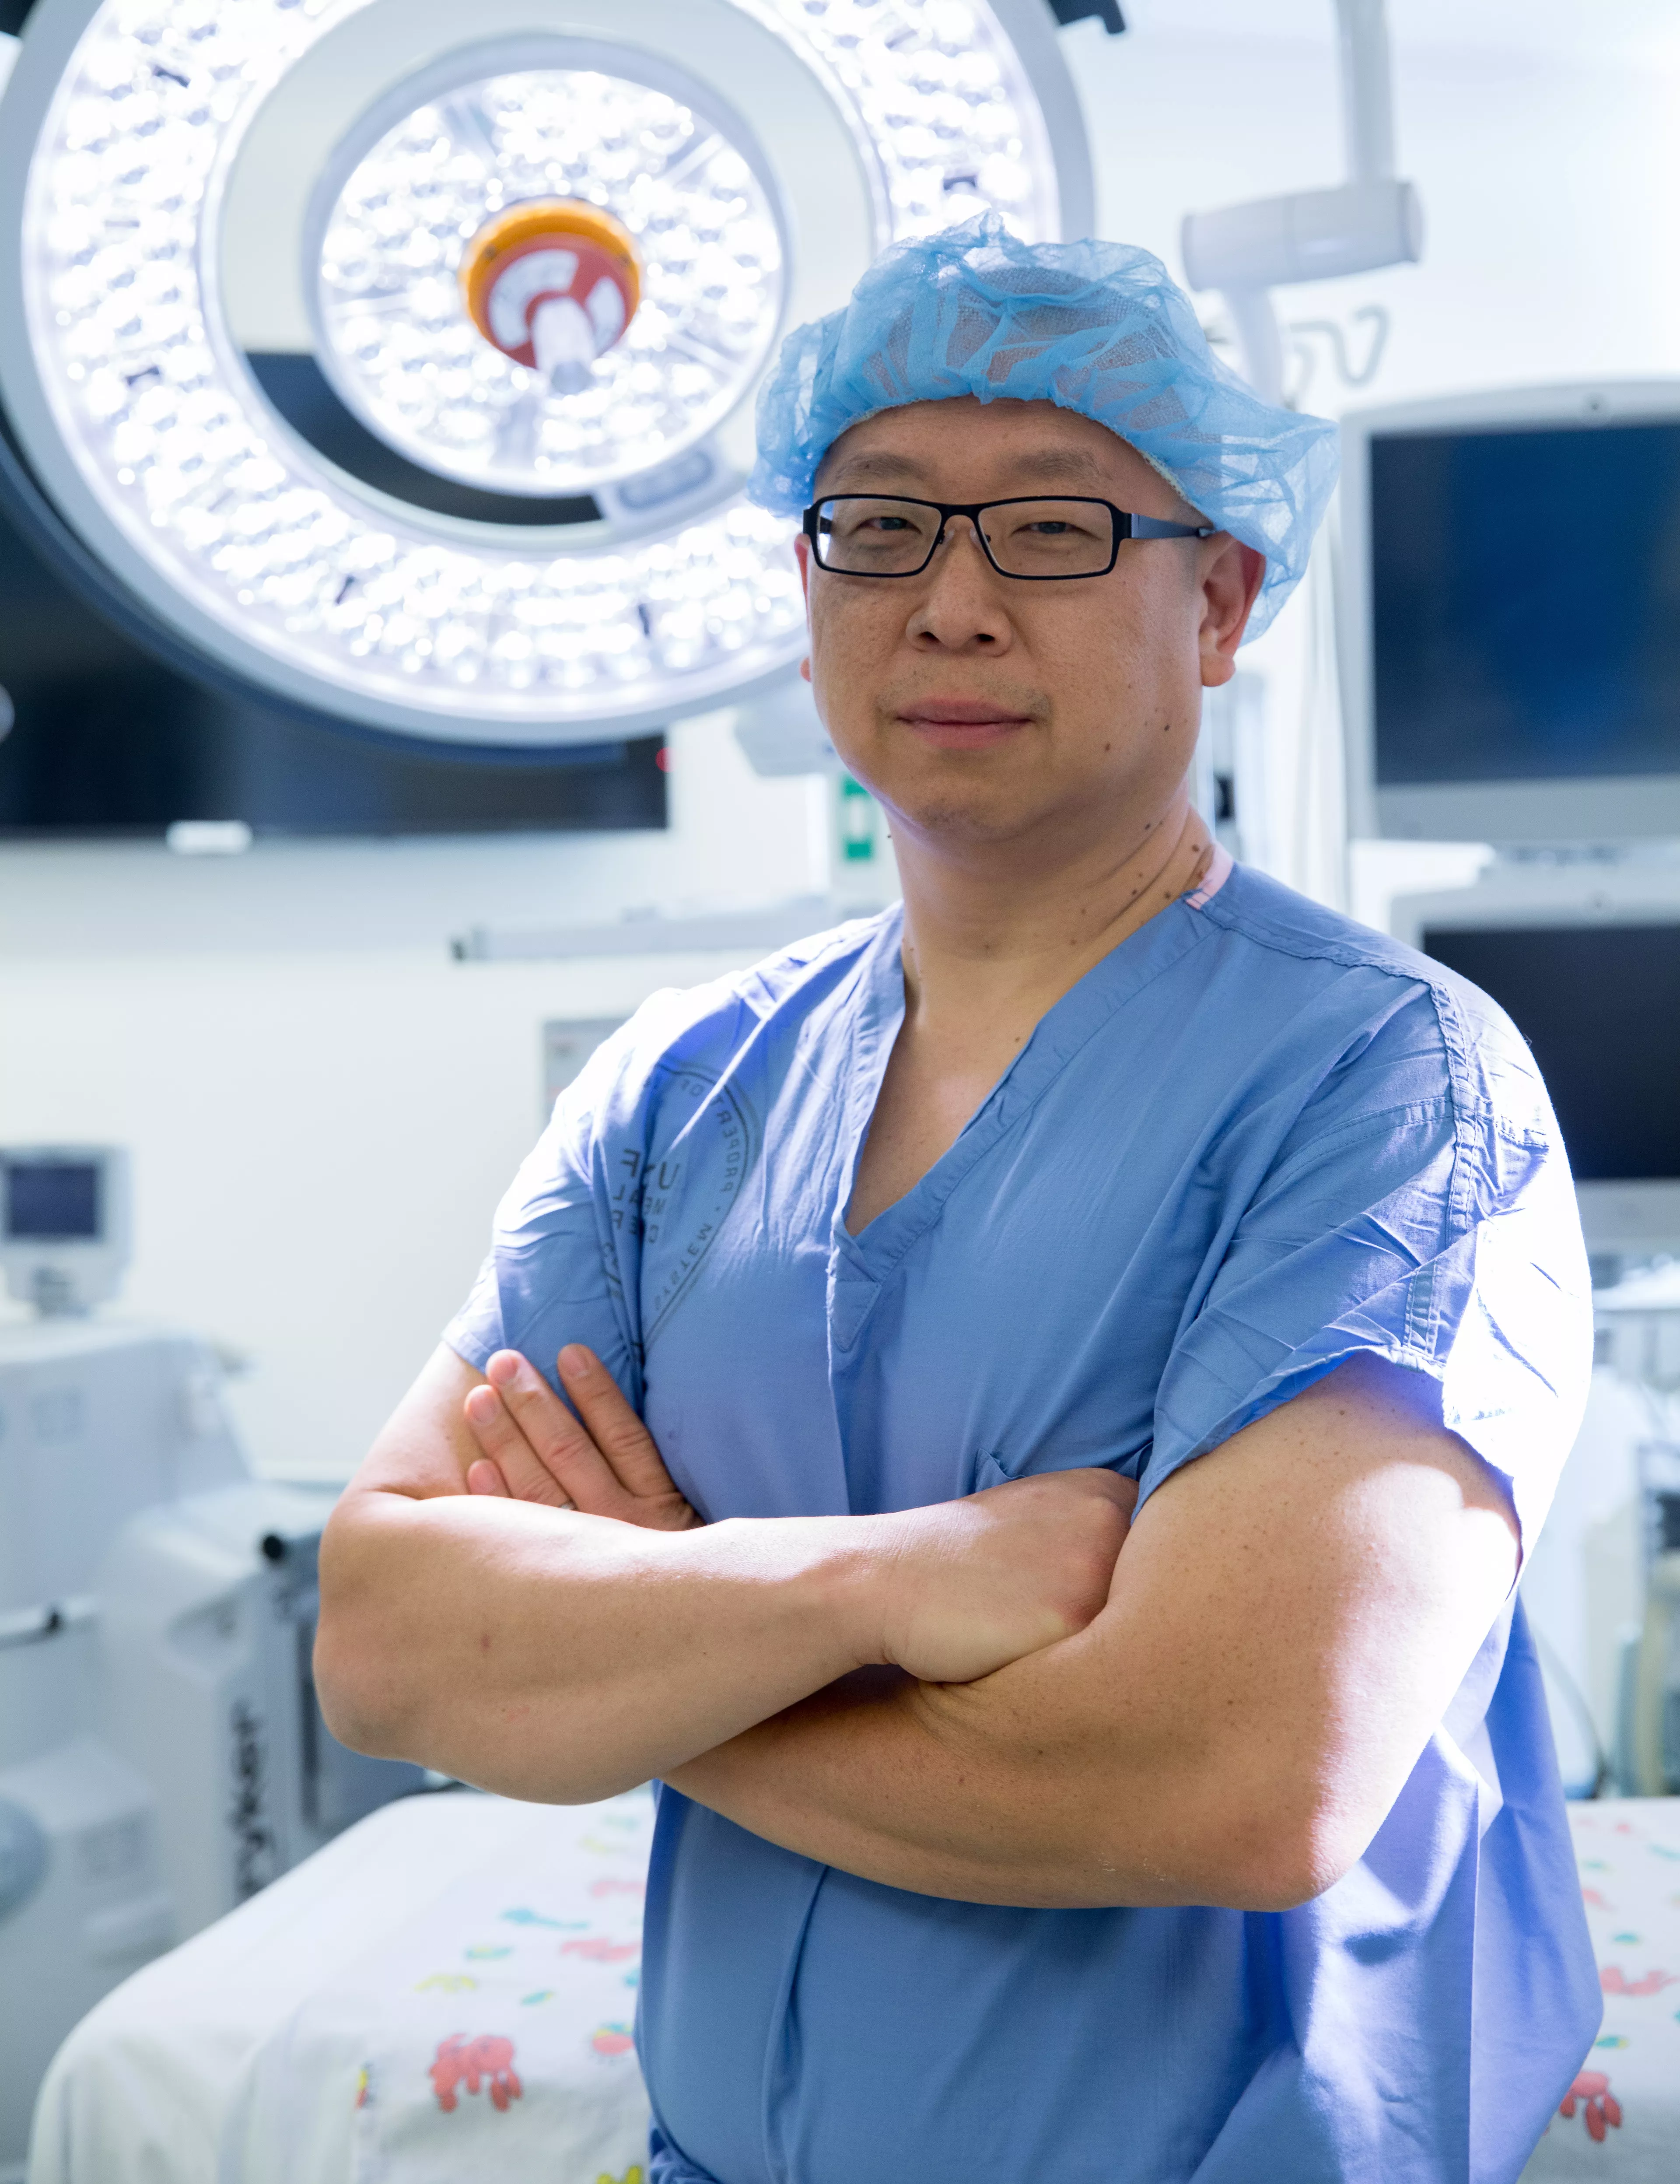 In the operating room with Hanmin Lee, MD